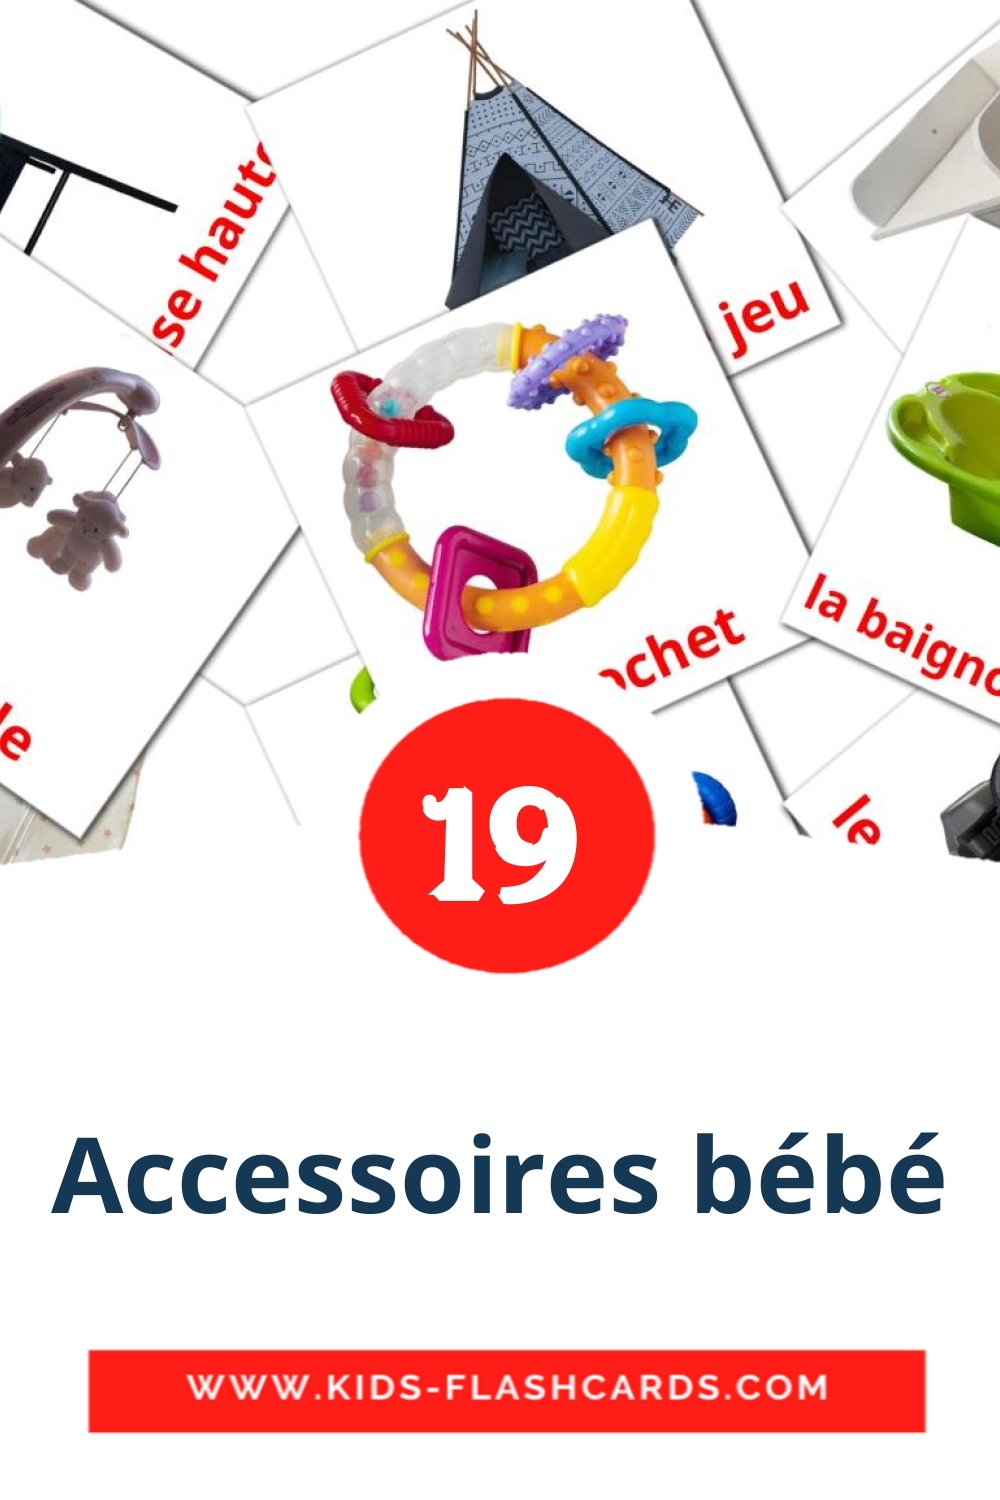 19 Accessoires bébé Picture Cards for Kindergarden in french